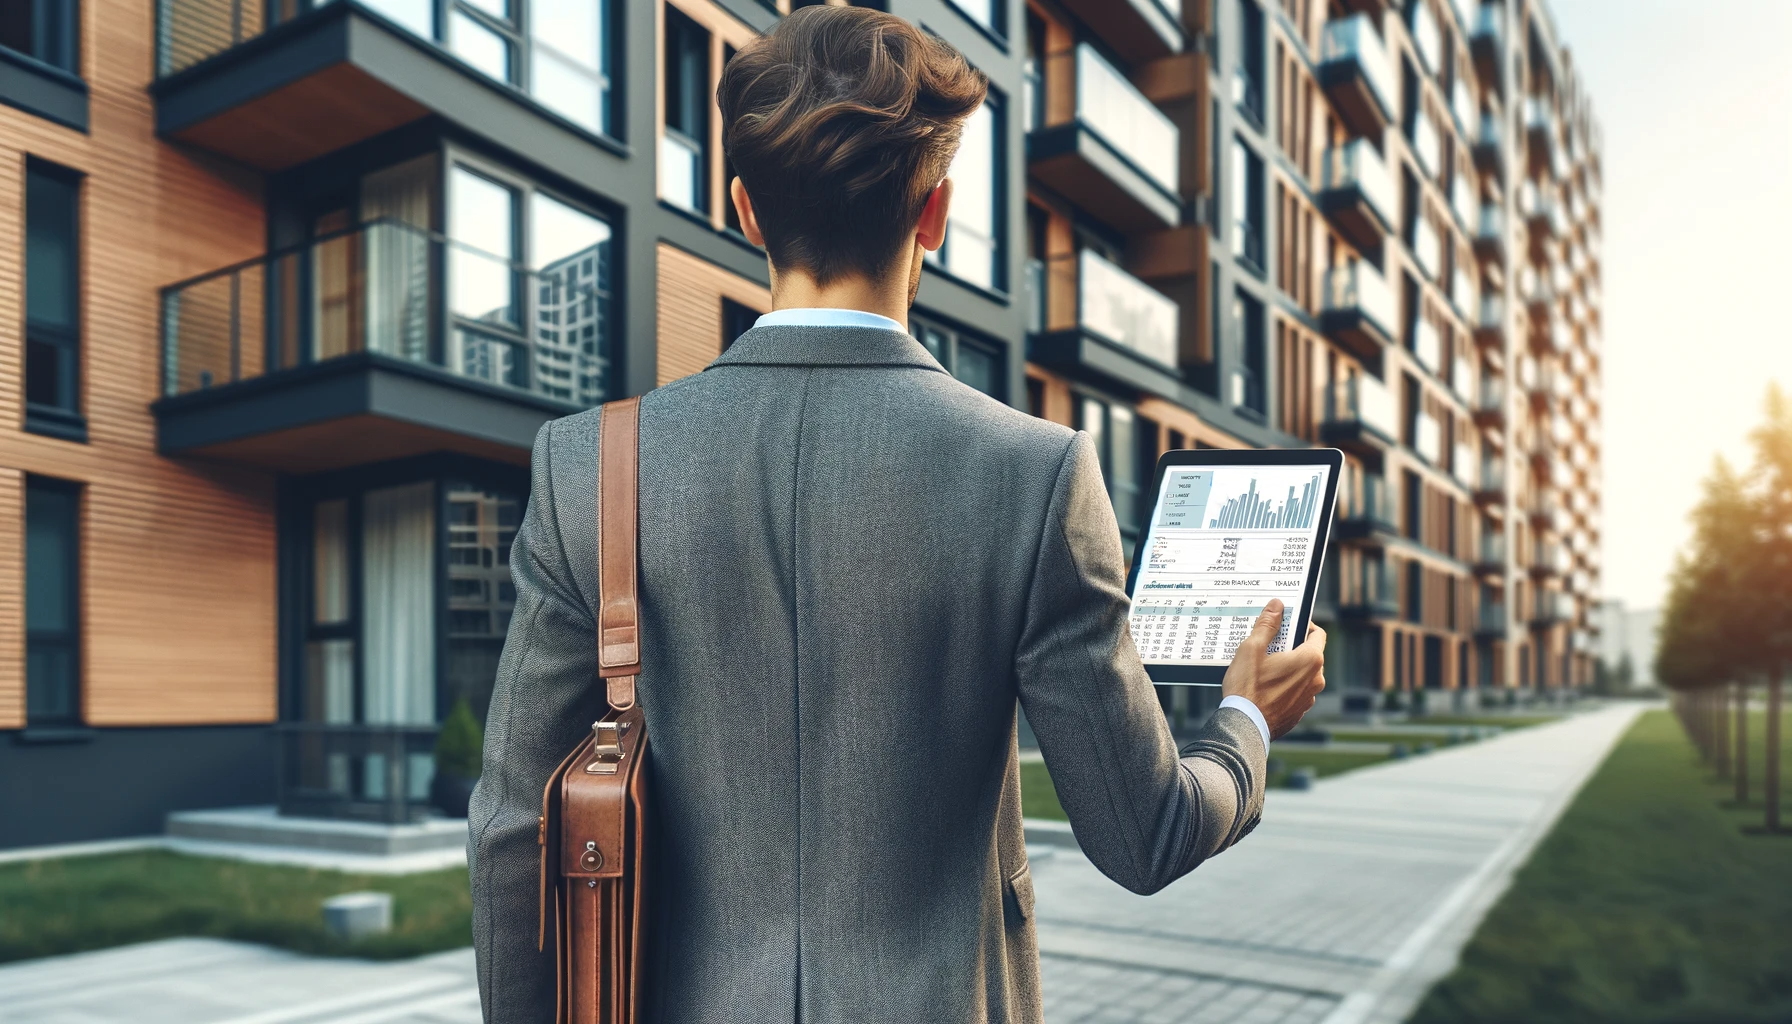 A well-dressed young man walking alongside an apartment building holding a tablet with investment information.